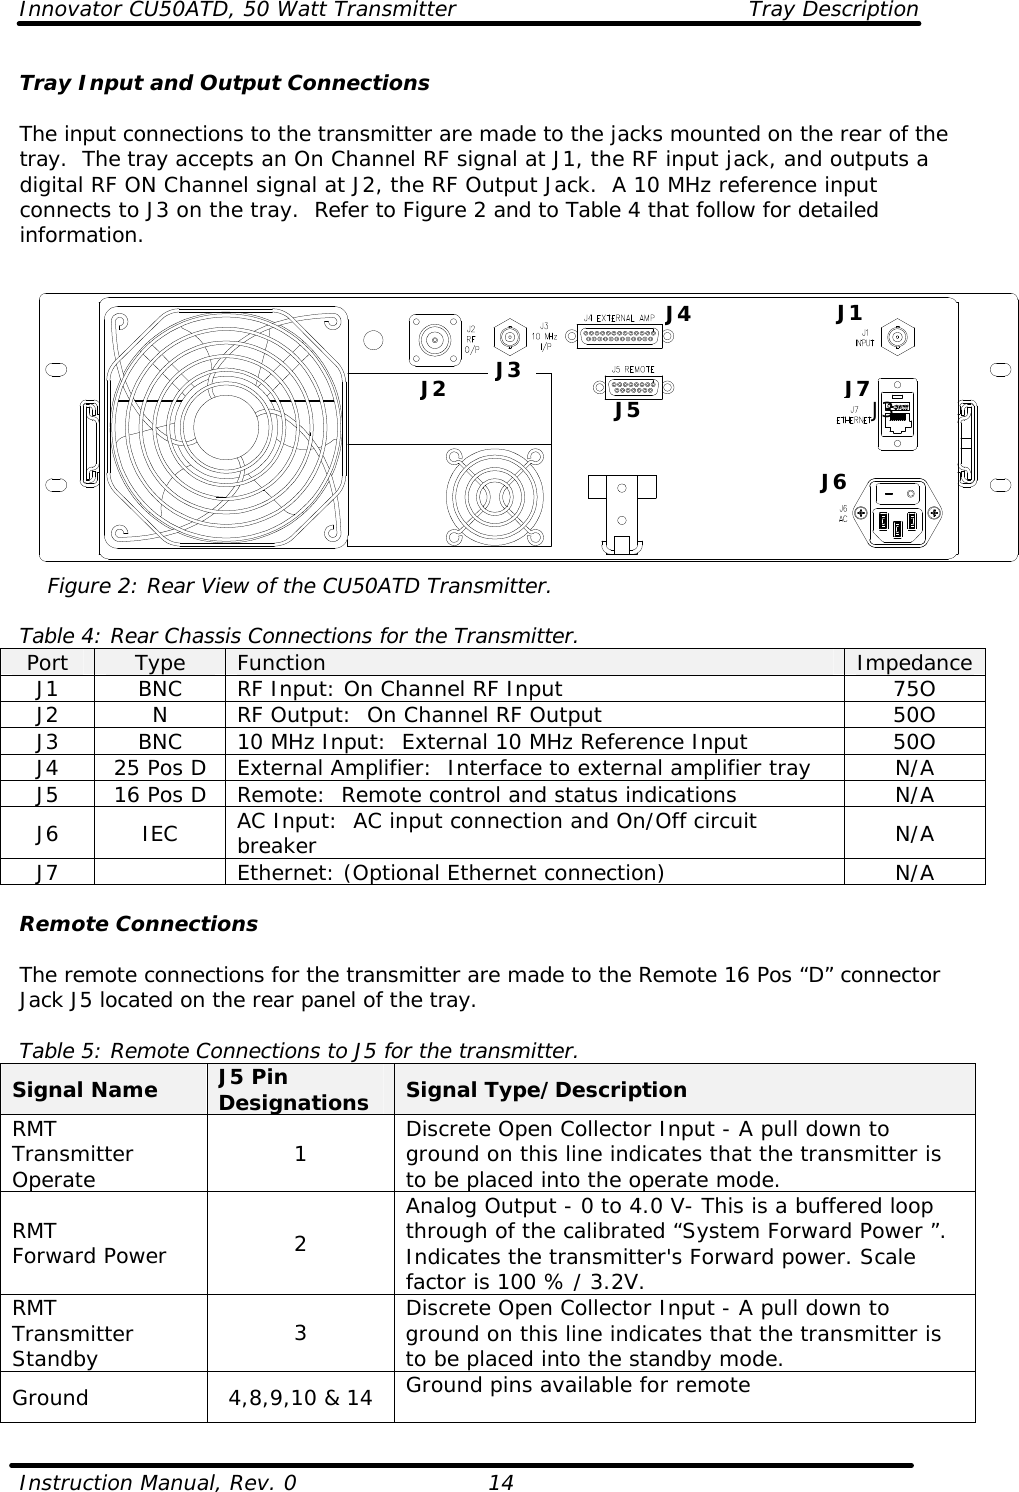 Innovator CU50ATD, 50 Watt Transmitter Tray Description  Instruction Manual, Rev. 0    14 Tray Input and Output Connections  The input connections to the transmitter are made to the jacks mounted on the rear of the tray.  The tray accepts an On Channel RF signal at J1, the RF input jack, and outputs a digital RF ON Channel signal at J2, the RF Output Jack.  A 10 MHz reference input connects to J3 on the tray.  Refer to Figure 2 and to Table 4 that follow for detailed information.       Figure 2: Rear View of the CU50ATD Transmitter.  Table 4: Rear Chassis Connections for the Transmitter. Port Type Function Impedance J1 BNC RF Input: On Channel RF Input 75O J2 N RF Output:  On Channel RF Output 50O J3 BNC 10 MHz Input:  External 10 MHz Reference Input 50O J4 25 Pos D External Amplifier:  Interface to external amplifier tray N/A J5 16 Pos D Remote:  Remote control and status indications N/A J6 IEC AC Input:  AC input connection and On/Off circuit breaker N/A J7    Ethernet: (Optional Ethernet connection) N/A  Remote Connections  The remote connections for the transmitter are made to the Remote 16 Pos “D” connector Jack J5 located on the rear panel of the tray.   Table 5: Remote Connections to J5 for the transmitter. Signal Name J5 Pin Designations Signal Type/Description RMT Transmitter Operate 1 Discrete Open Collector Input - A pull down to ground on this line indicates that the transmitter is to be placed into the operate mode. RMT Forward Power 2 Analog Output - 0 to 4.0 V- This is a buffered loop through of the calibrated “System Forward Power ”.  Indicates the transmitter&apos;s Forward power. Scale factor is 100 % / 3.2V. RMT Transmitter Standby 3 Discrete Open Collector Input - A pull down to ground on this line indicates that the transmitter is to be placed into the standby mode. Ground 4,8,9,10 &amp; 14 Ground pins available for remote  J4   J5  J1J7   J6 J3  J2  J3 